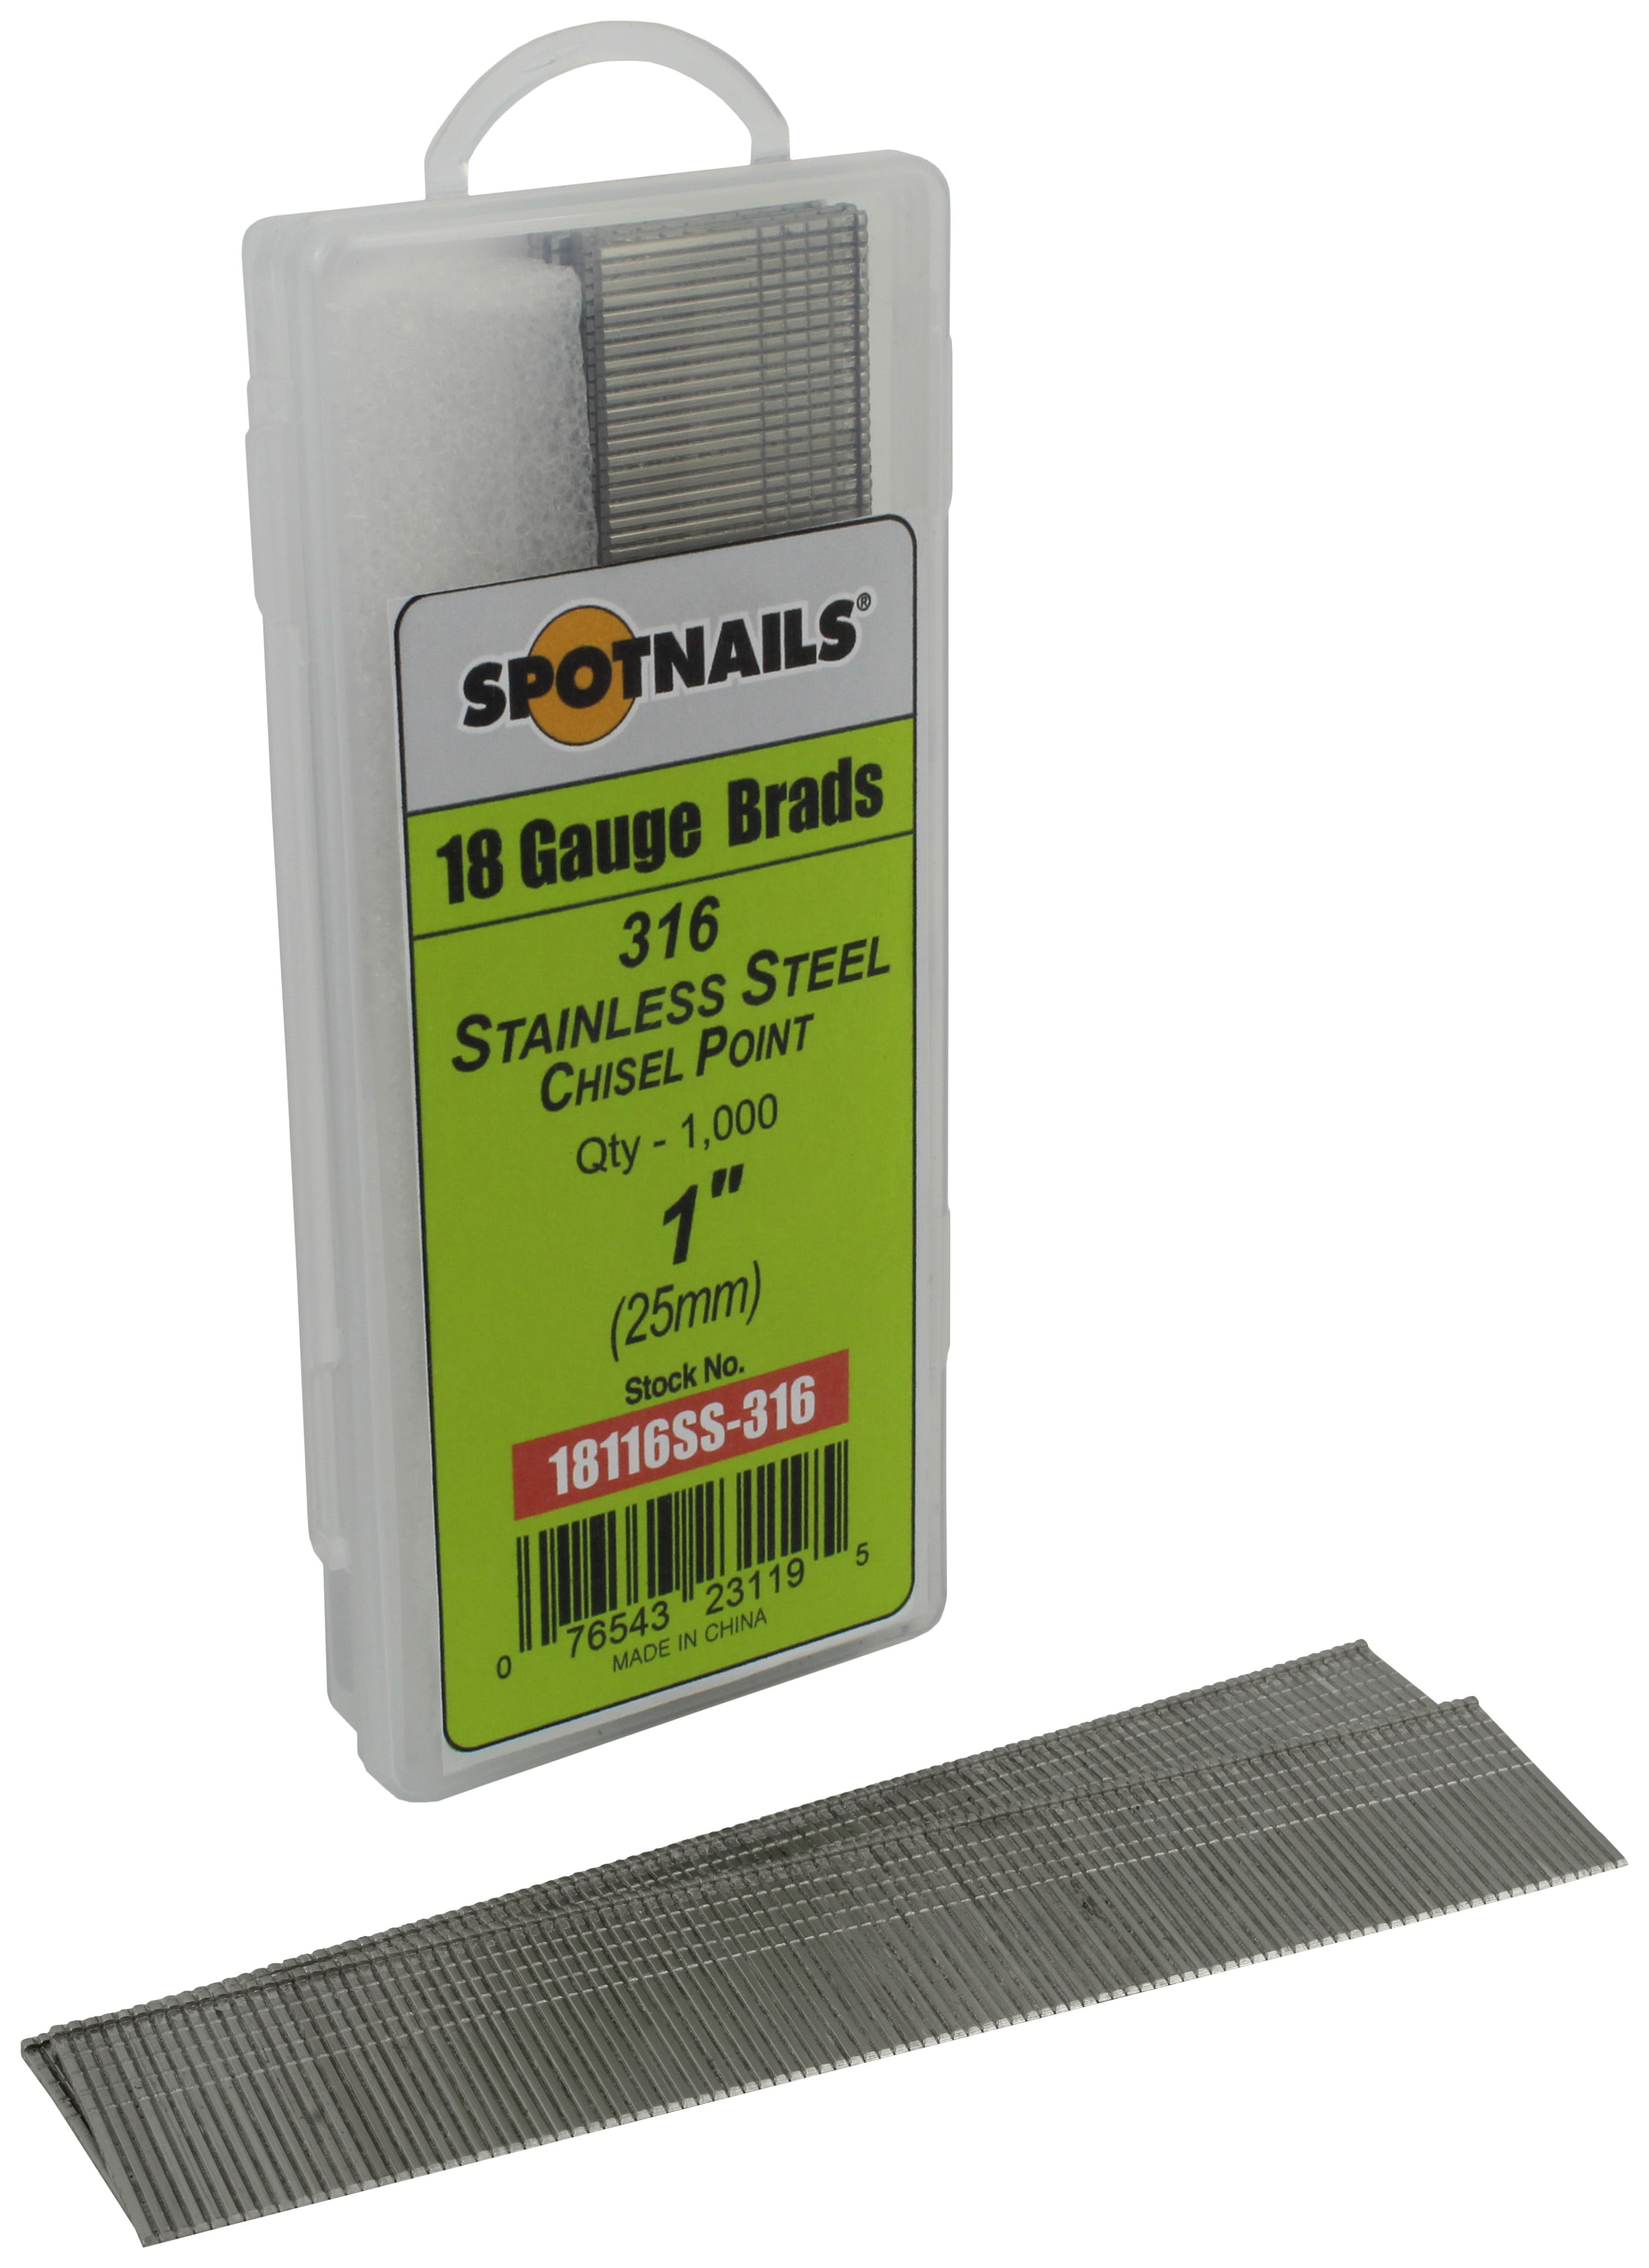 Spotnails 18116SS Finish Nails,18 Gauge 1" STAINLESS STEEL Brad Nails  2000pcs 